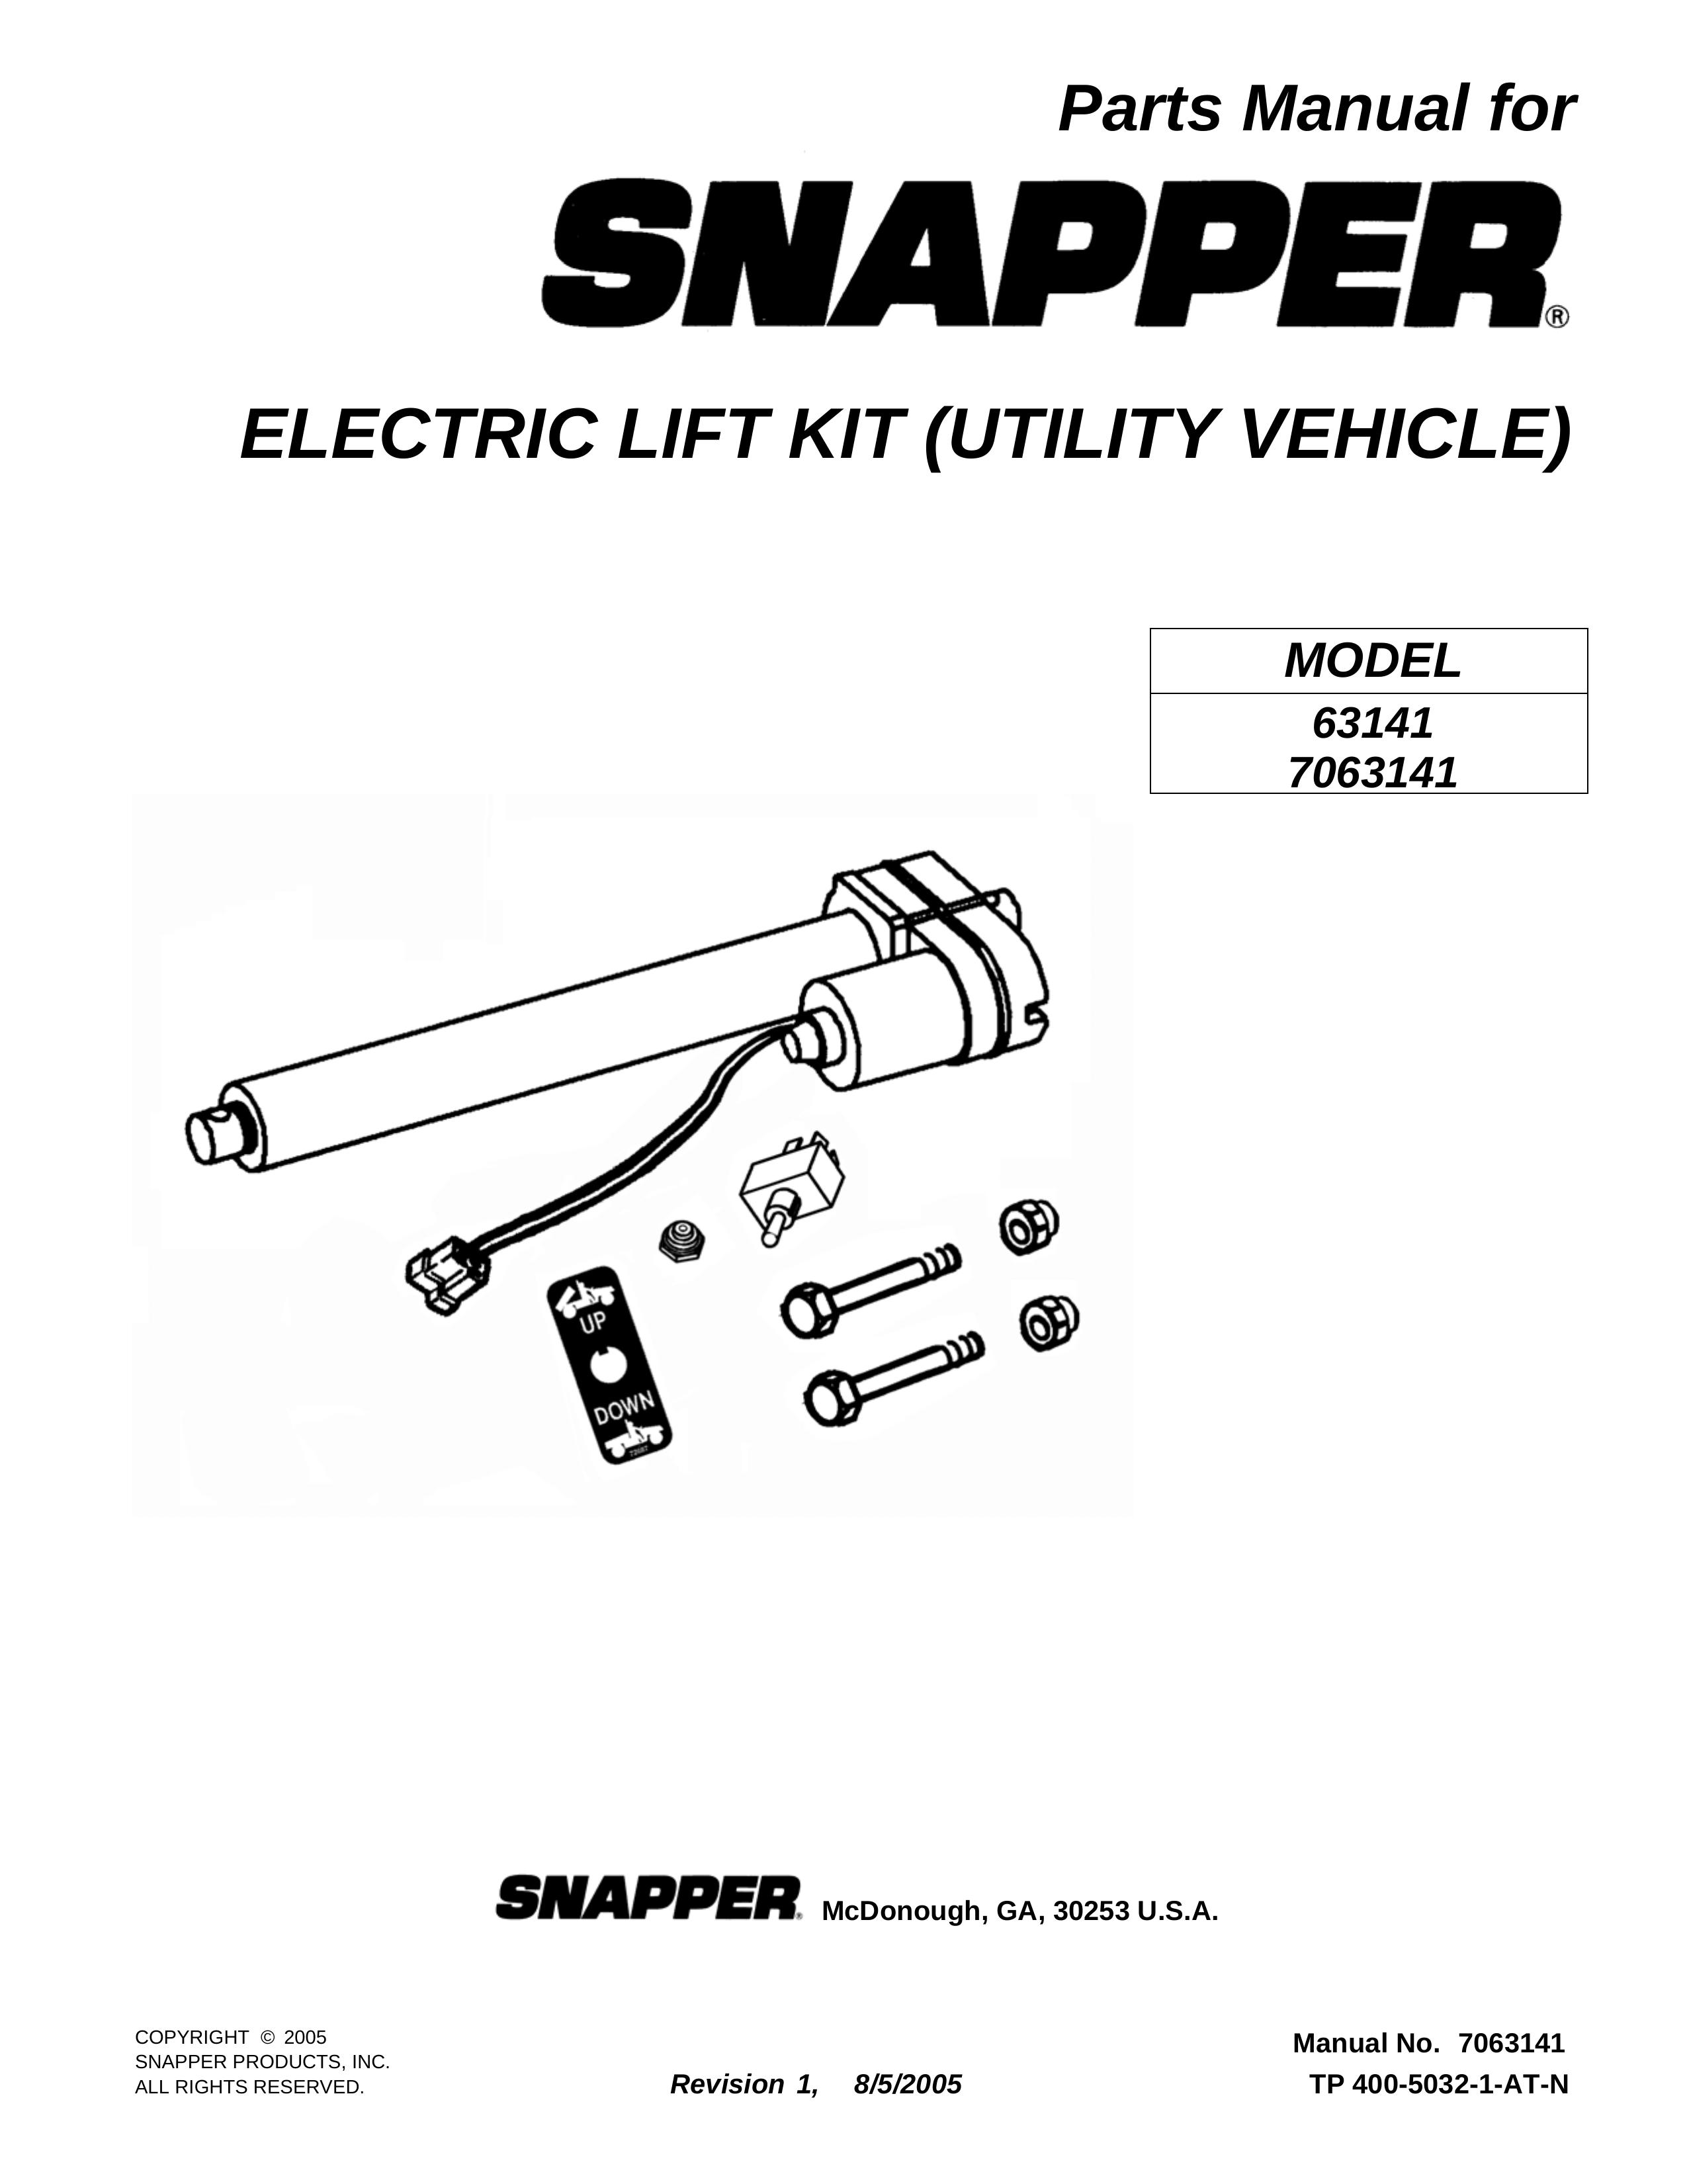 Snapper 7063141 Utility Vehicle User Manual